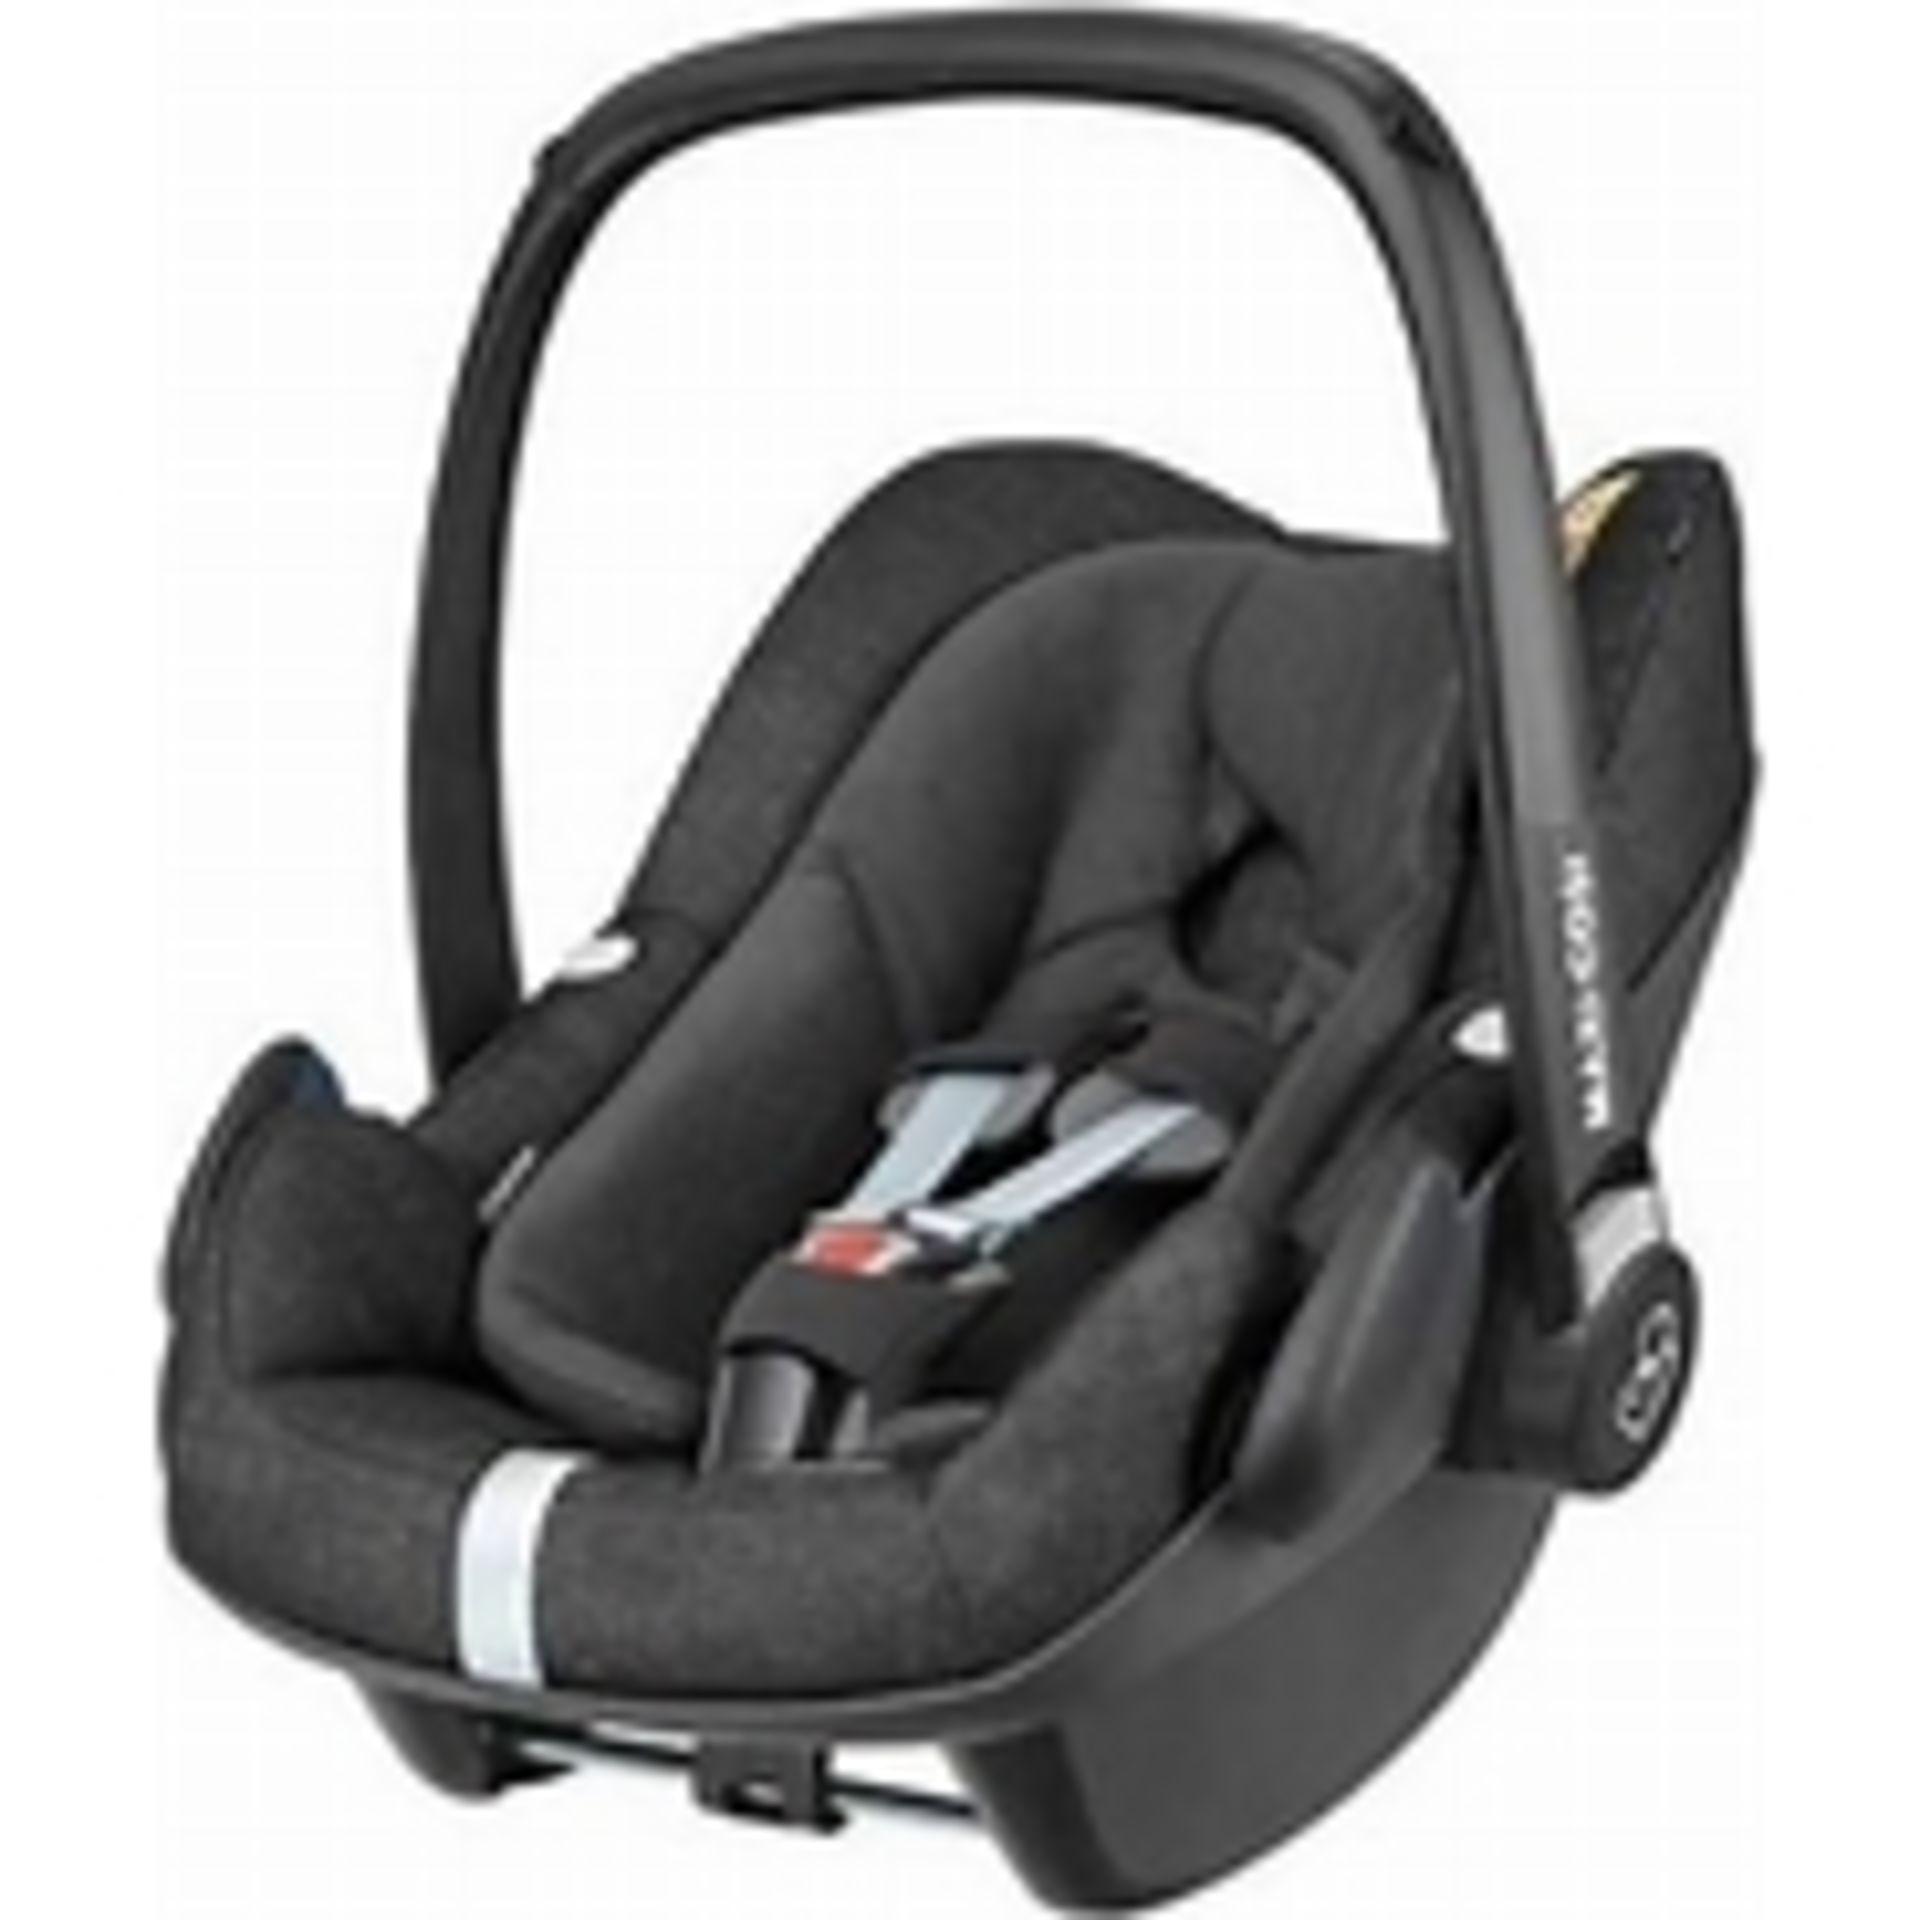 MAXI COSI PEBBLE PLUS CAR SEAT NEW UNUSED RRP £199 (STOCK IMAGE FOR REFERENCE ONLY-SEE OTHER PICS